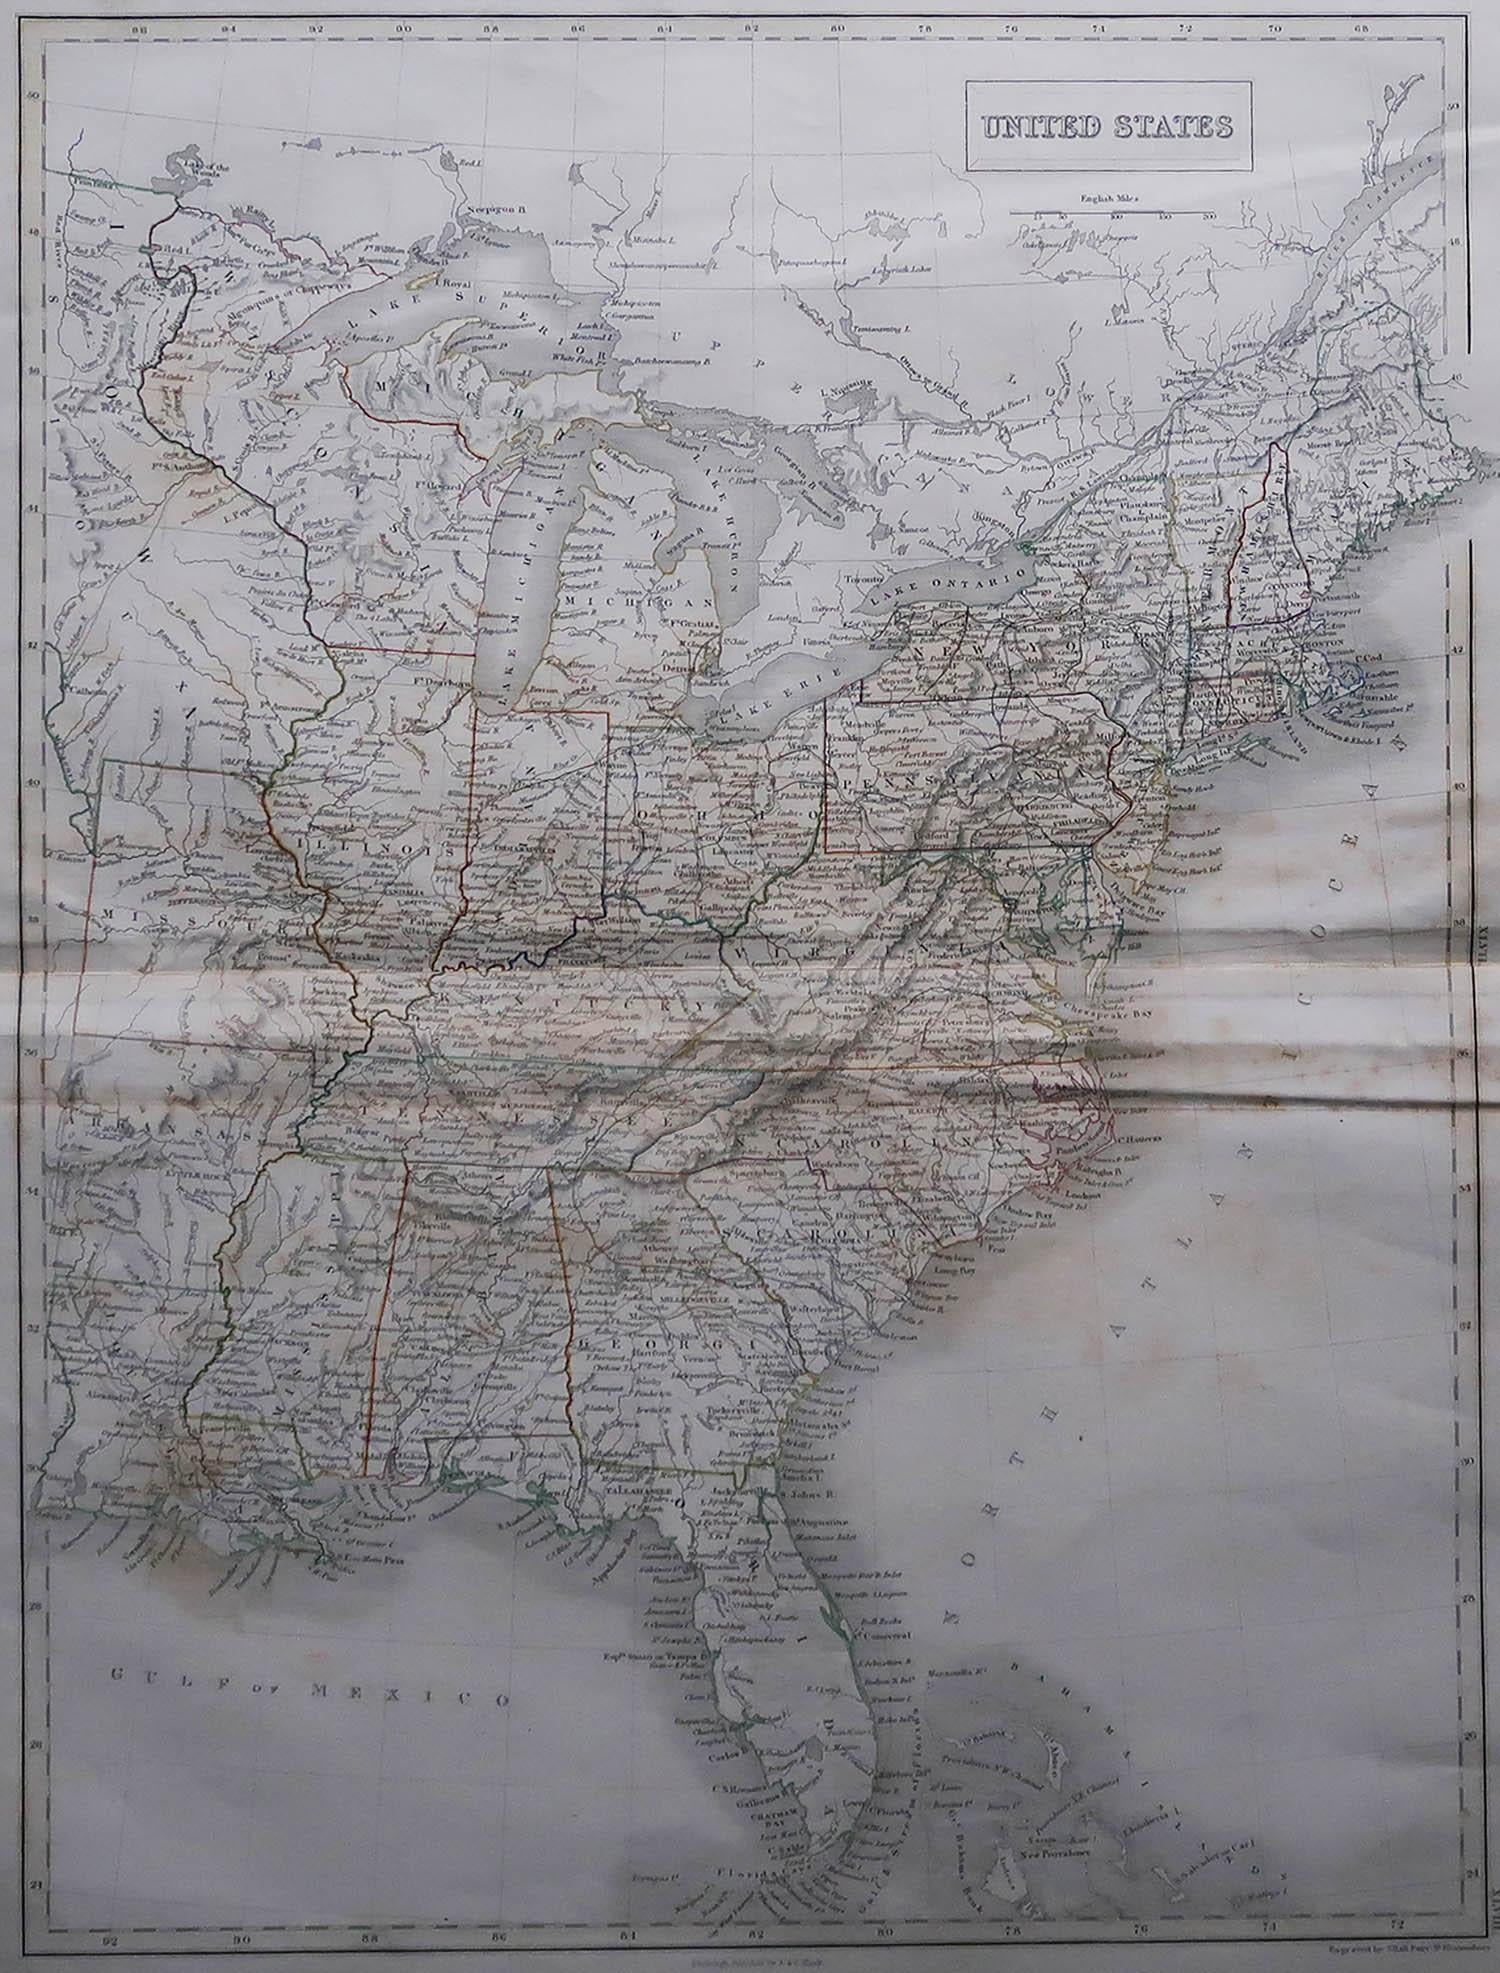 Great map of United States

Drawn and engraved by Sidney Hall

Steel engraving 

Original colour outline

Published by A & C Black. 1847

Some foxing and creasing in the central fold area

Unframed

Free shipping.

